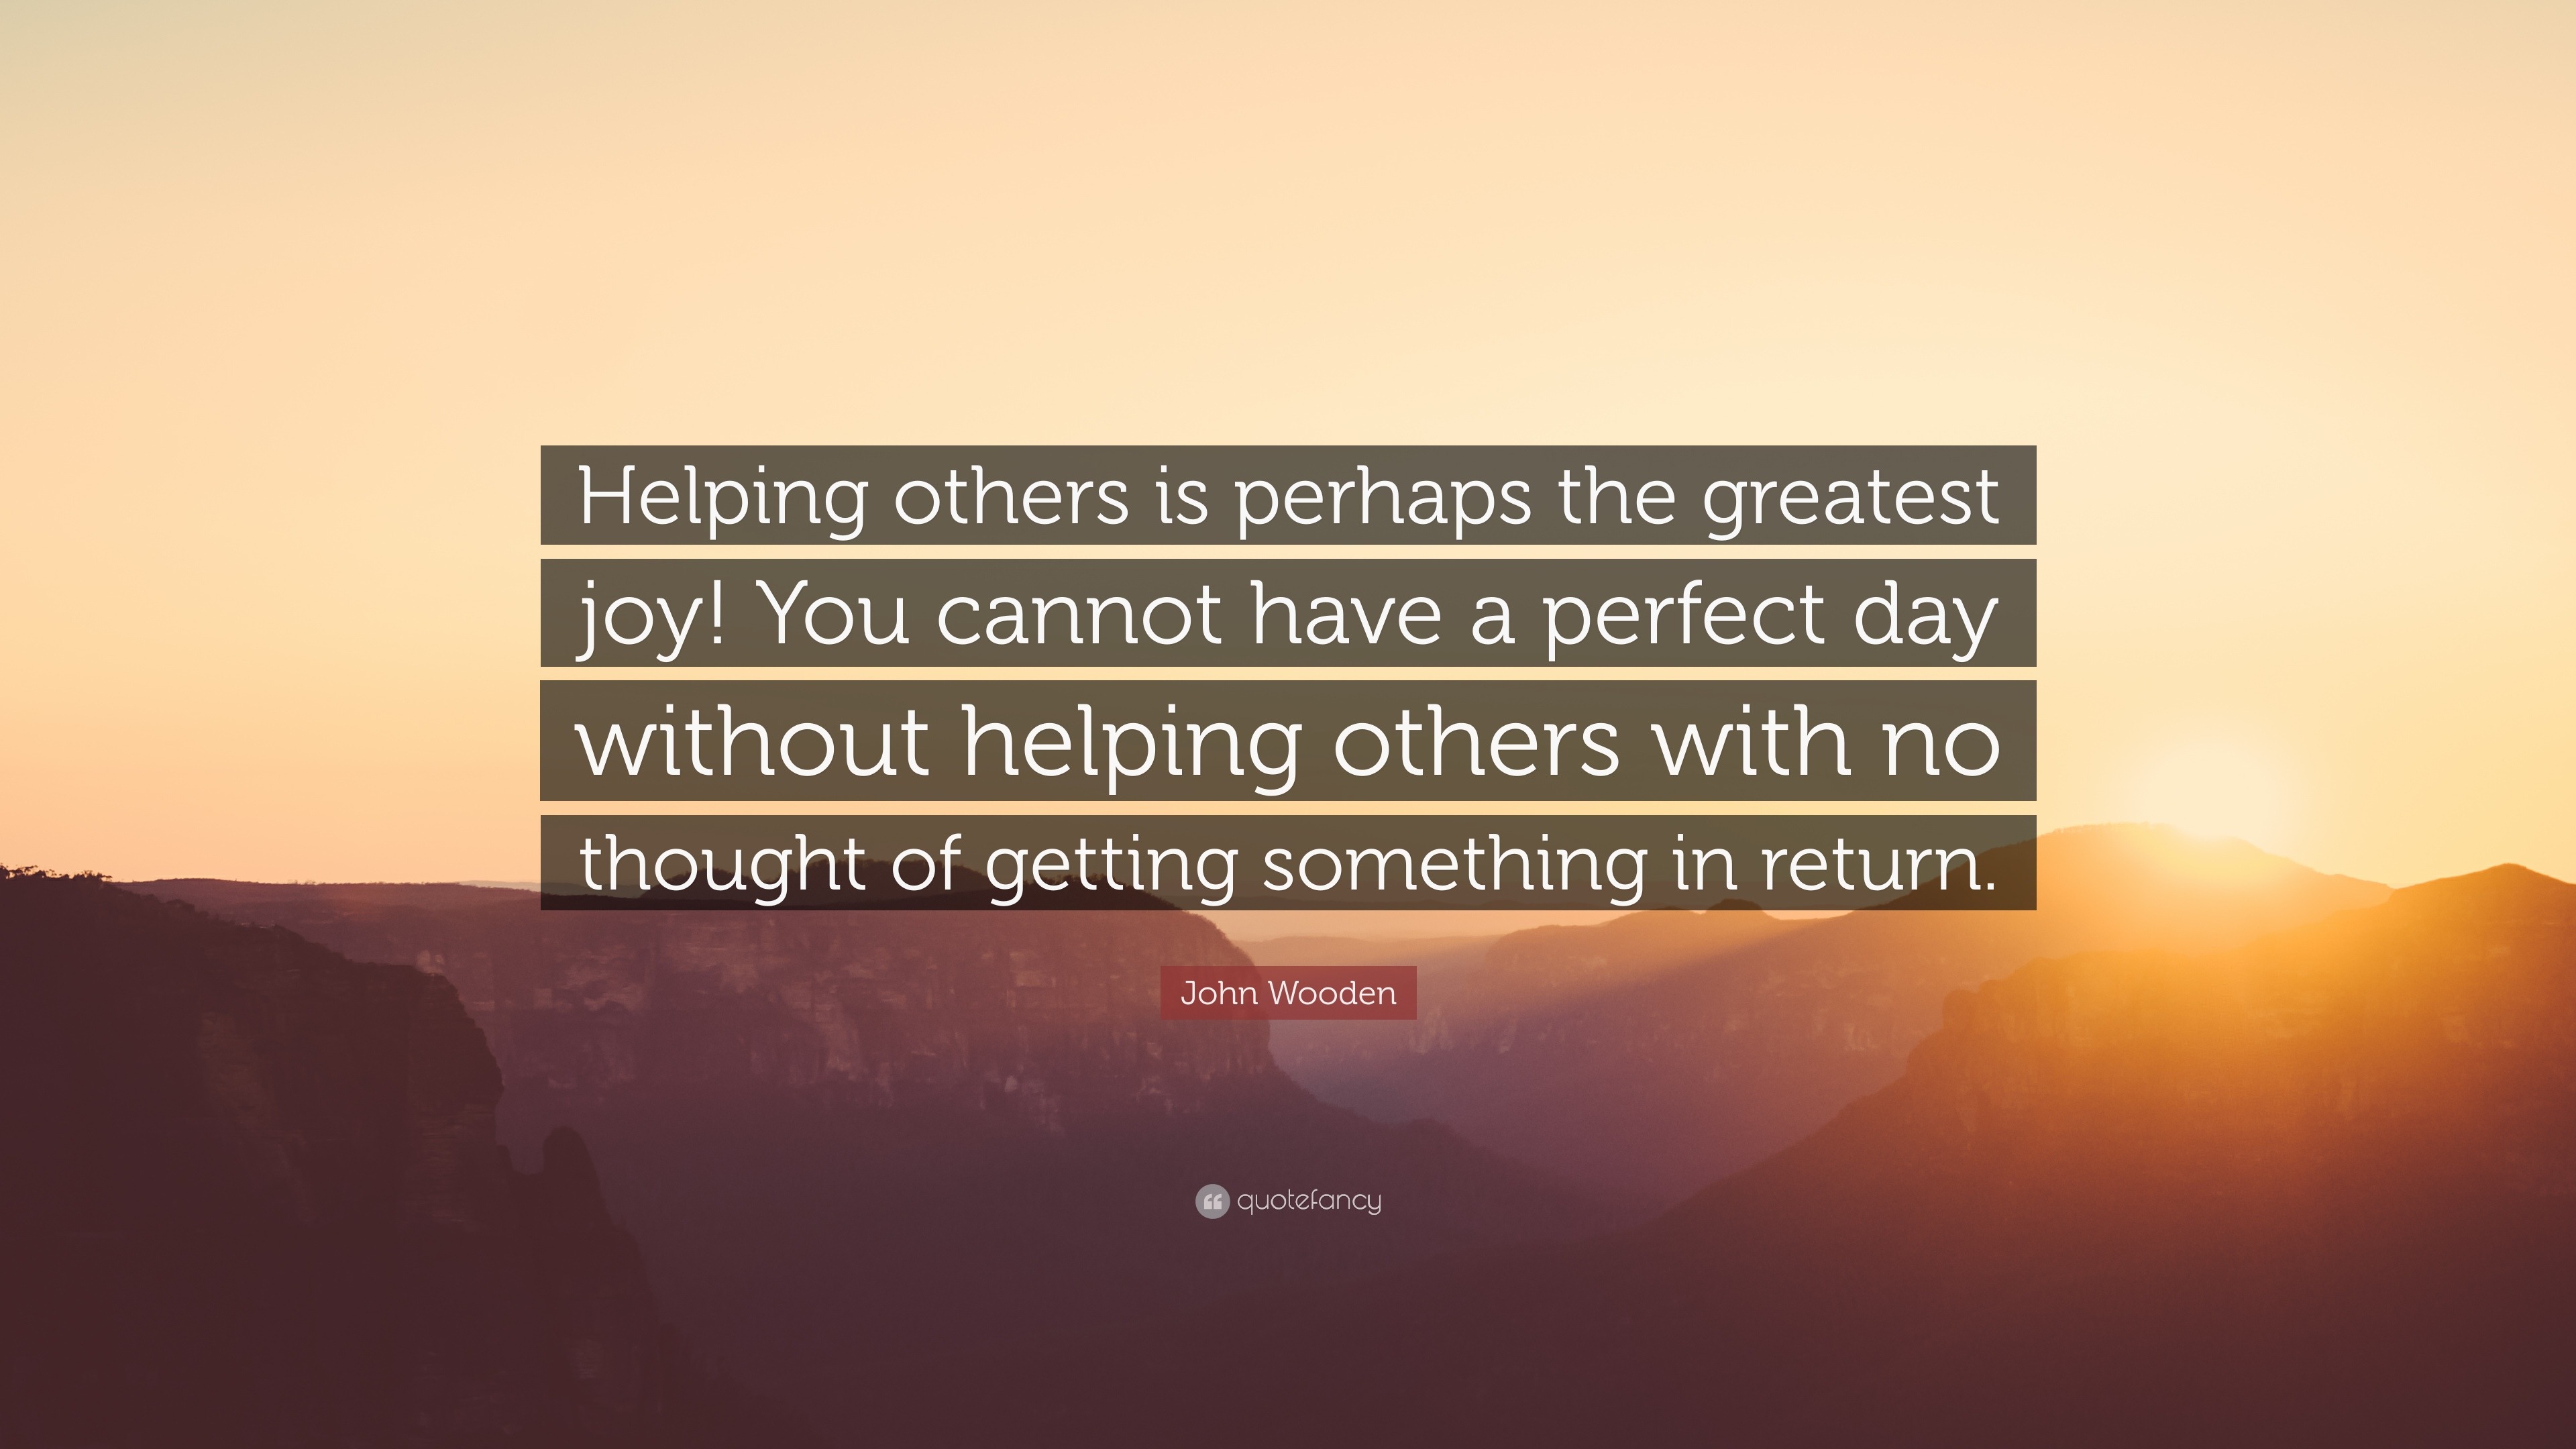 John Wooden Quote: “Helping others is perhaps the greatest joy! You ...